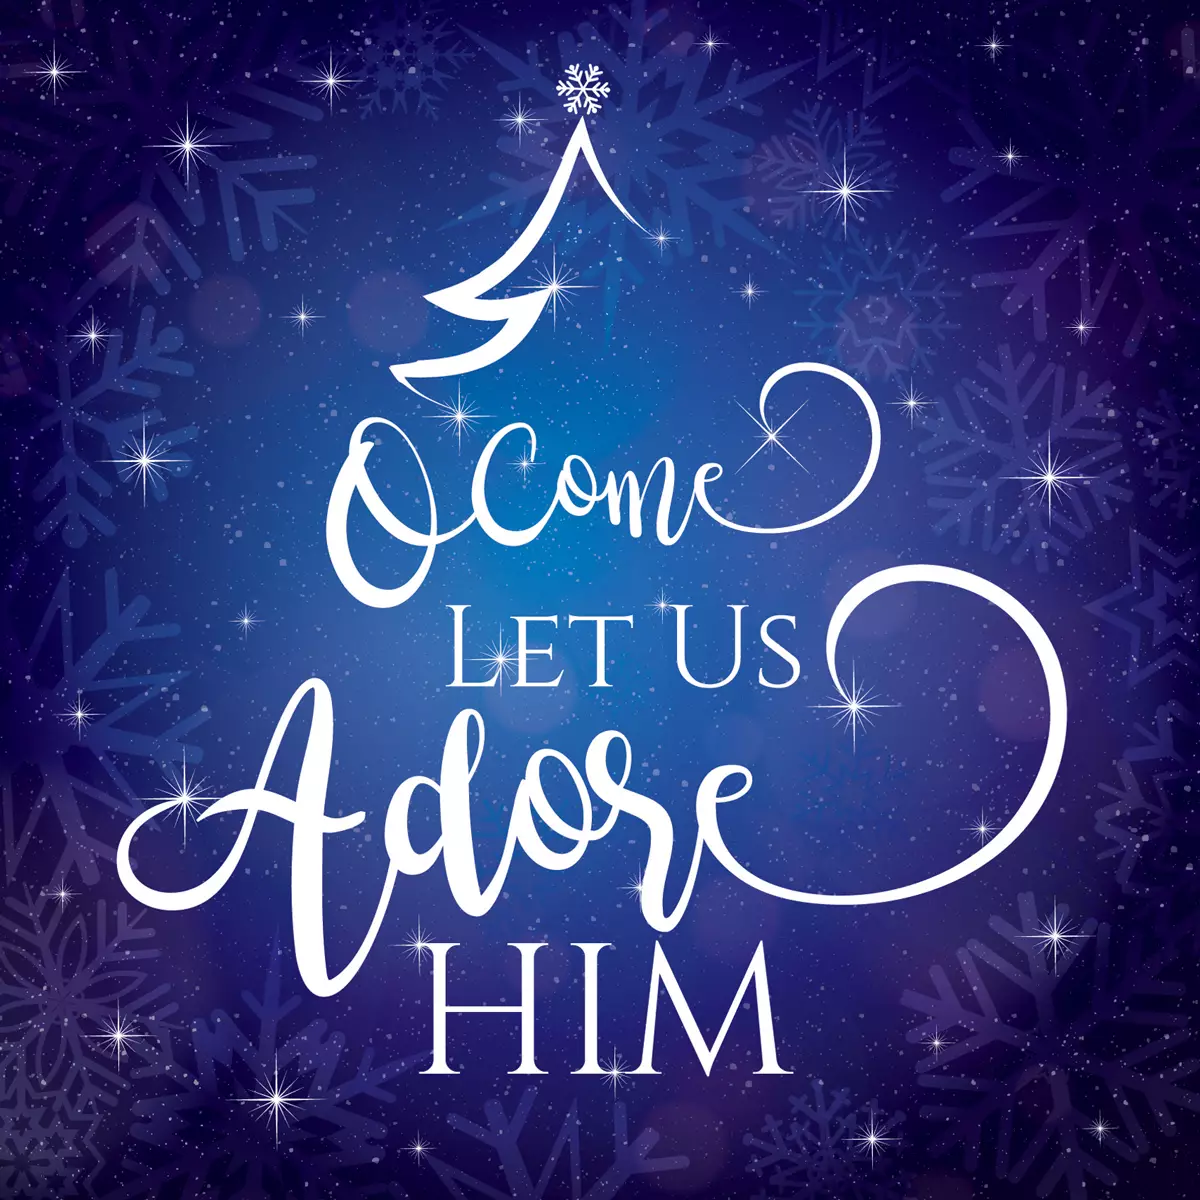 O Come Let Us Adore Him (Pack of 10) Christmas Cards